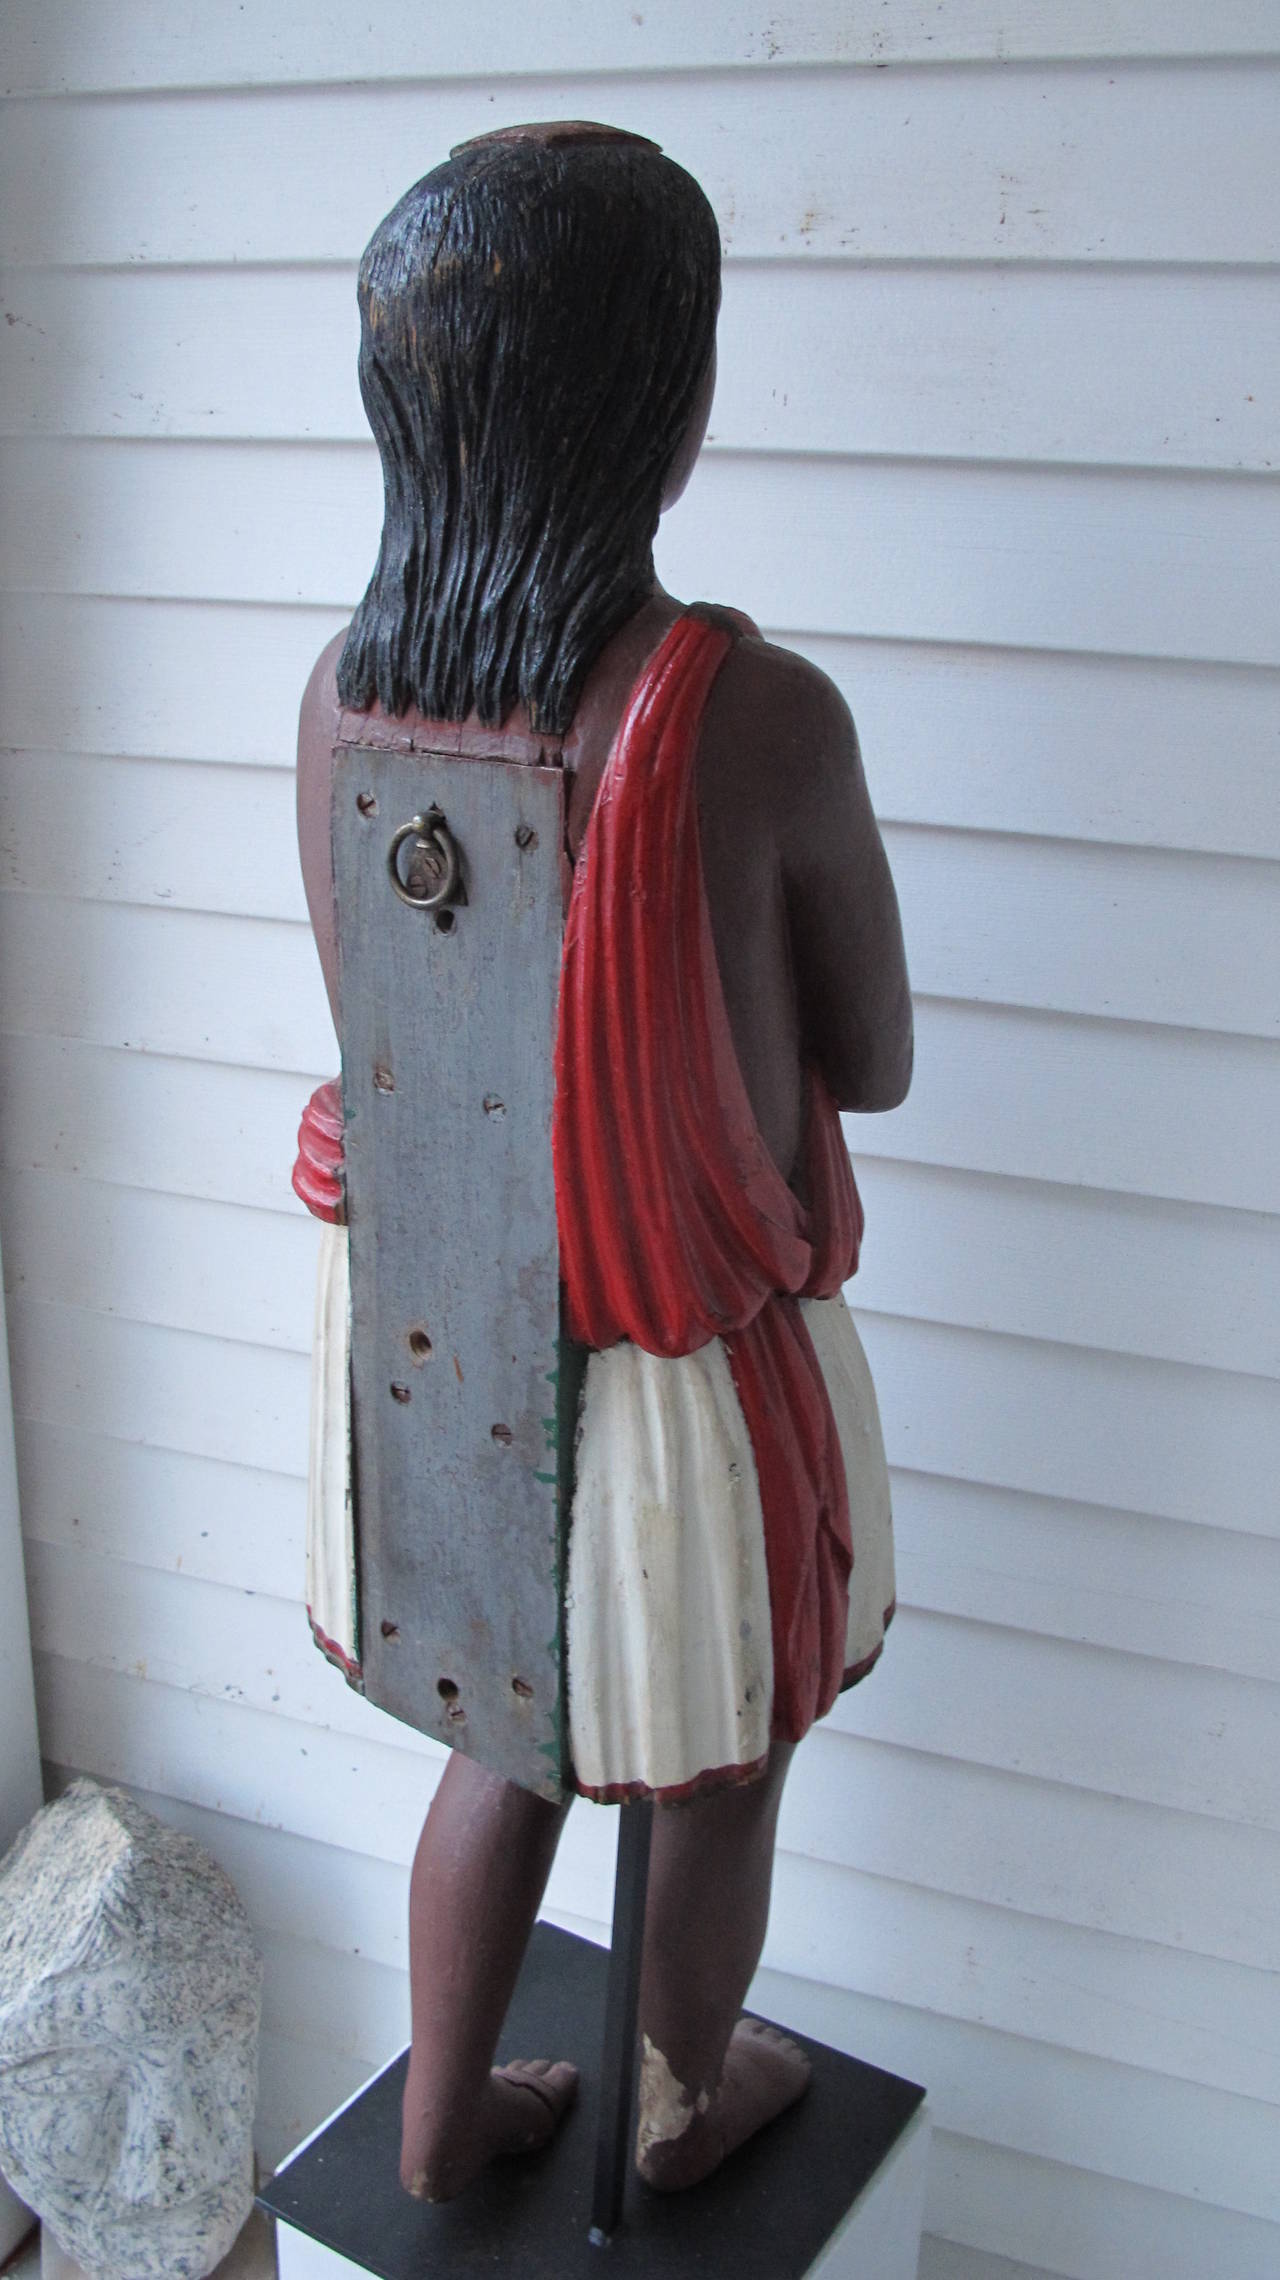 American Carved Wood Indian Circus Wagon Figure